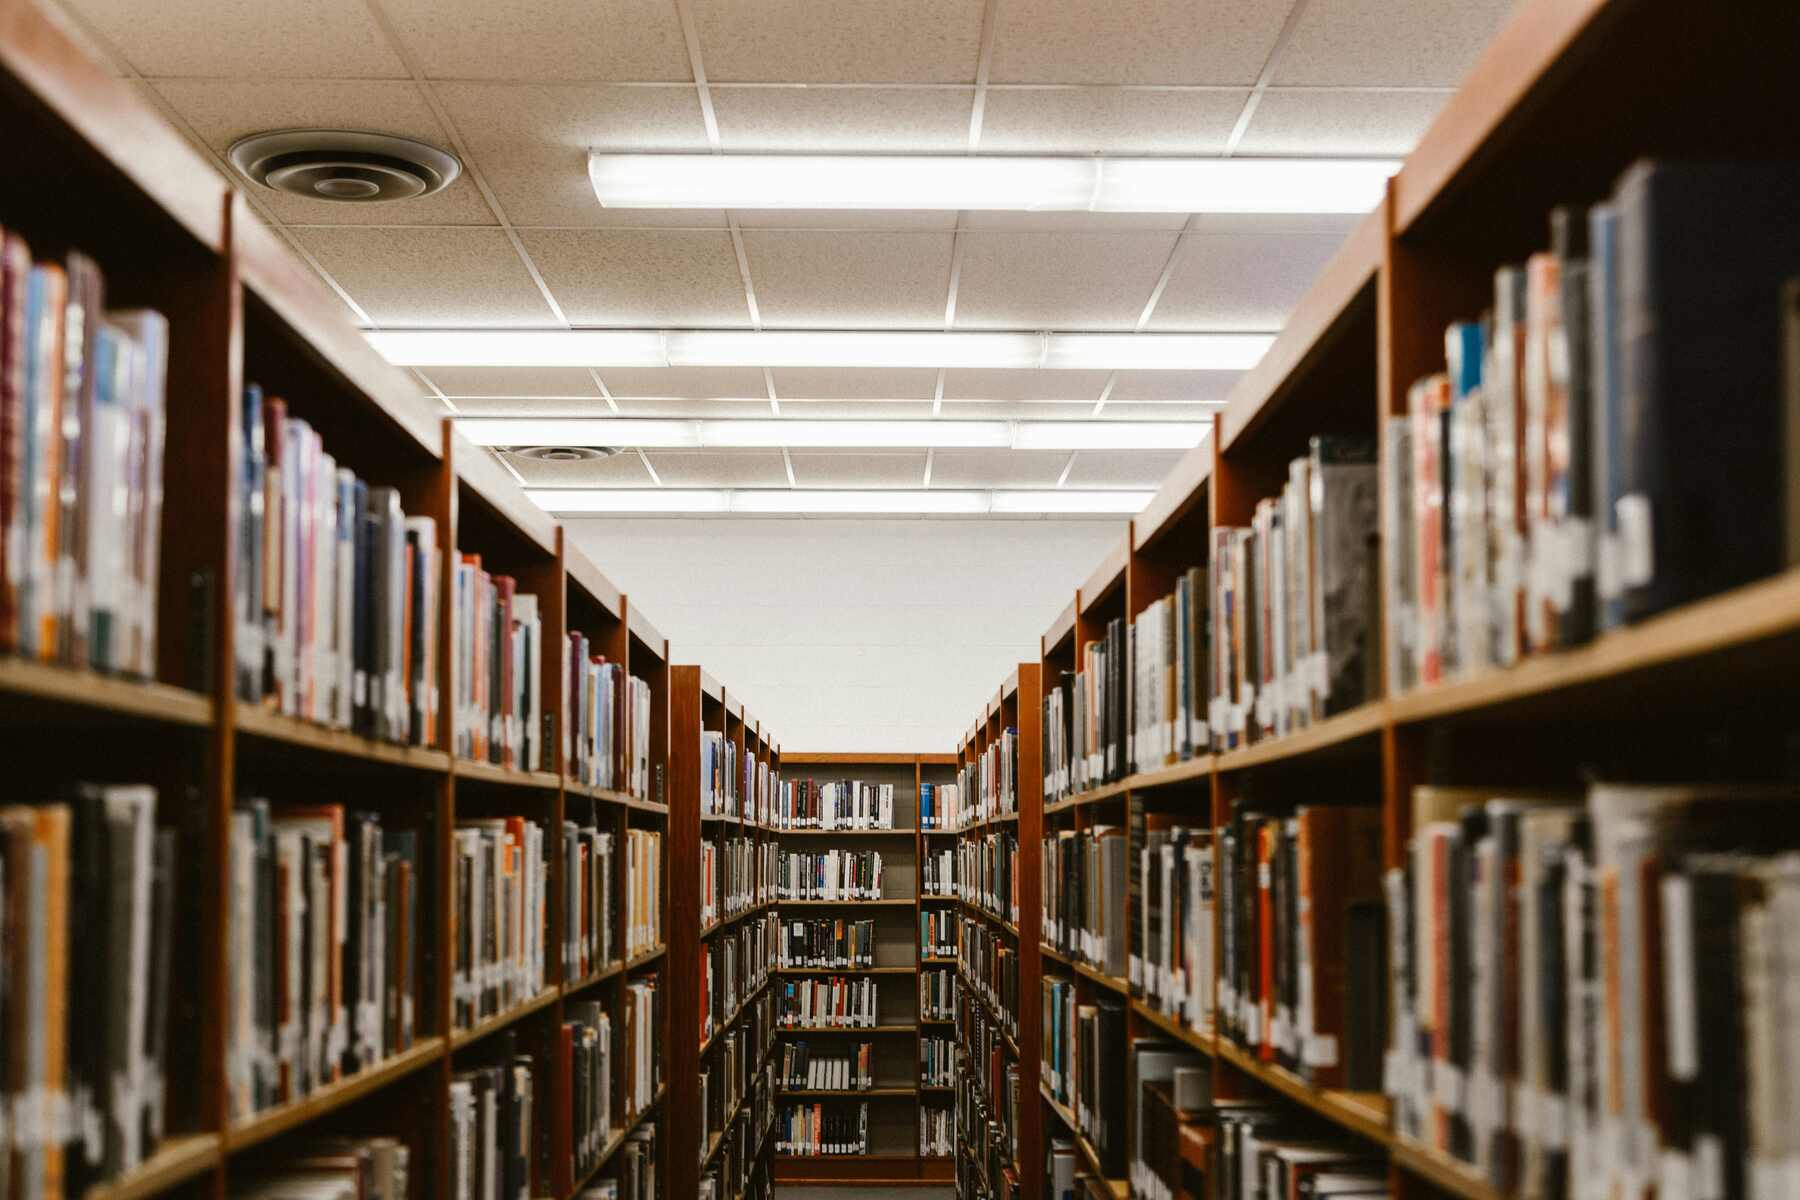 A narrow aisle of books filling the shelves in a library